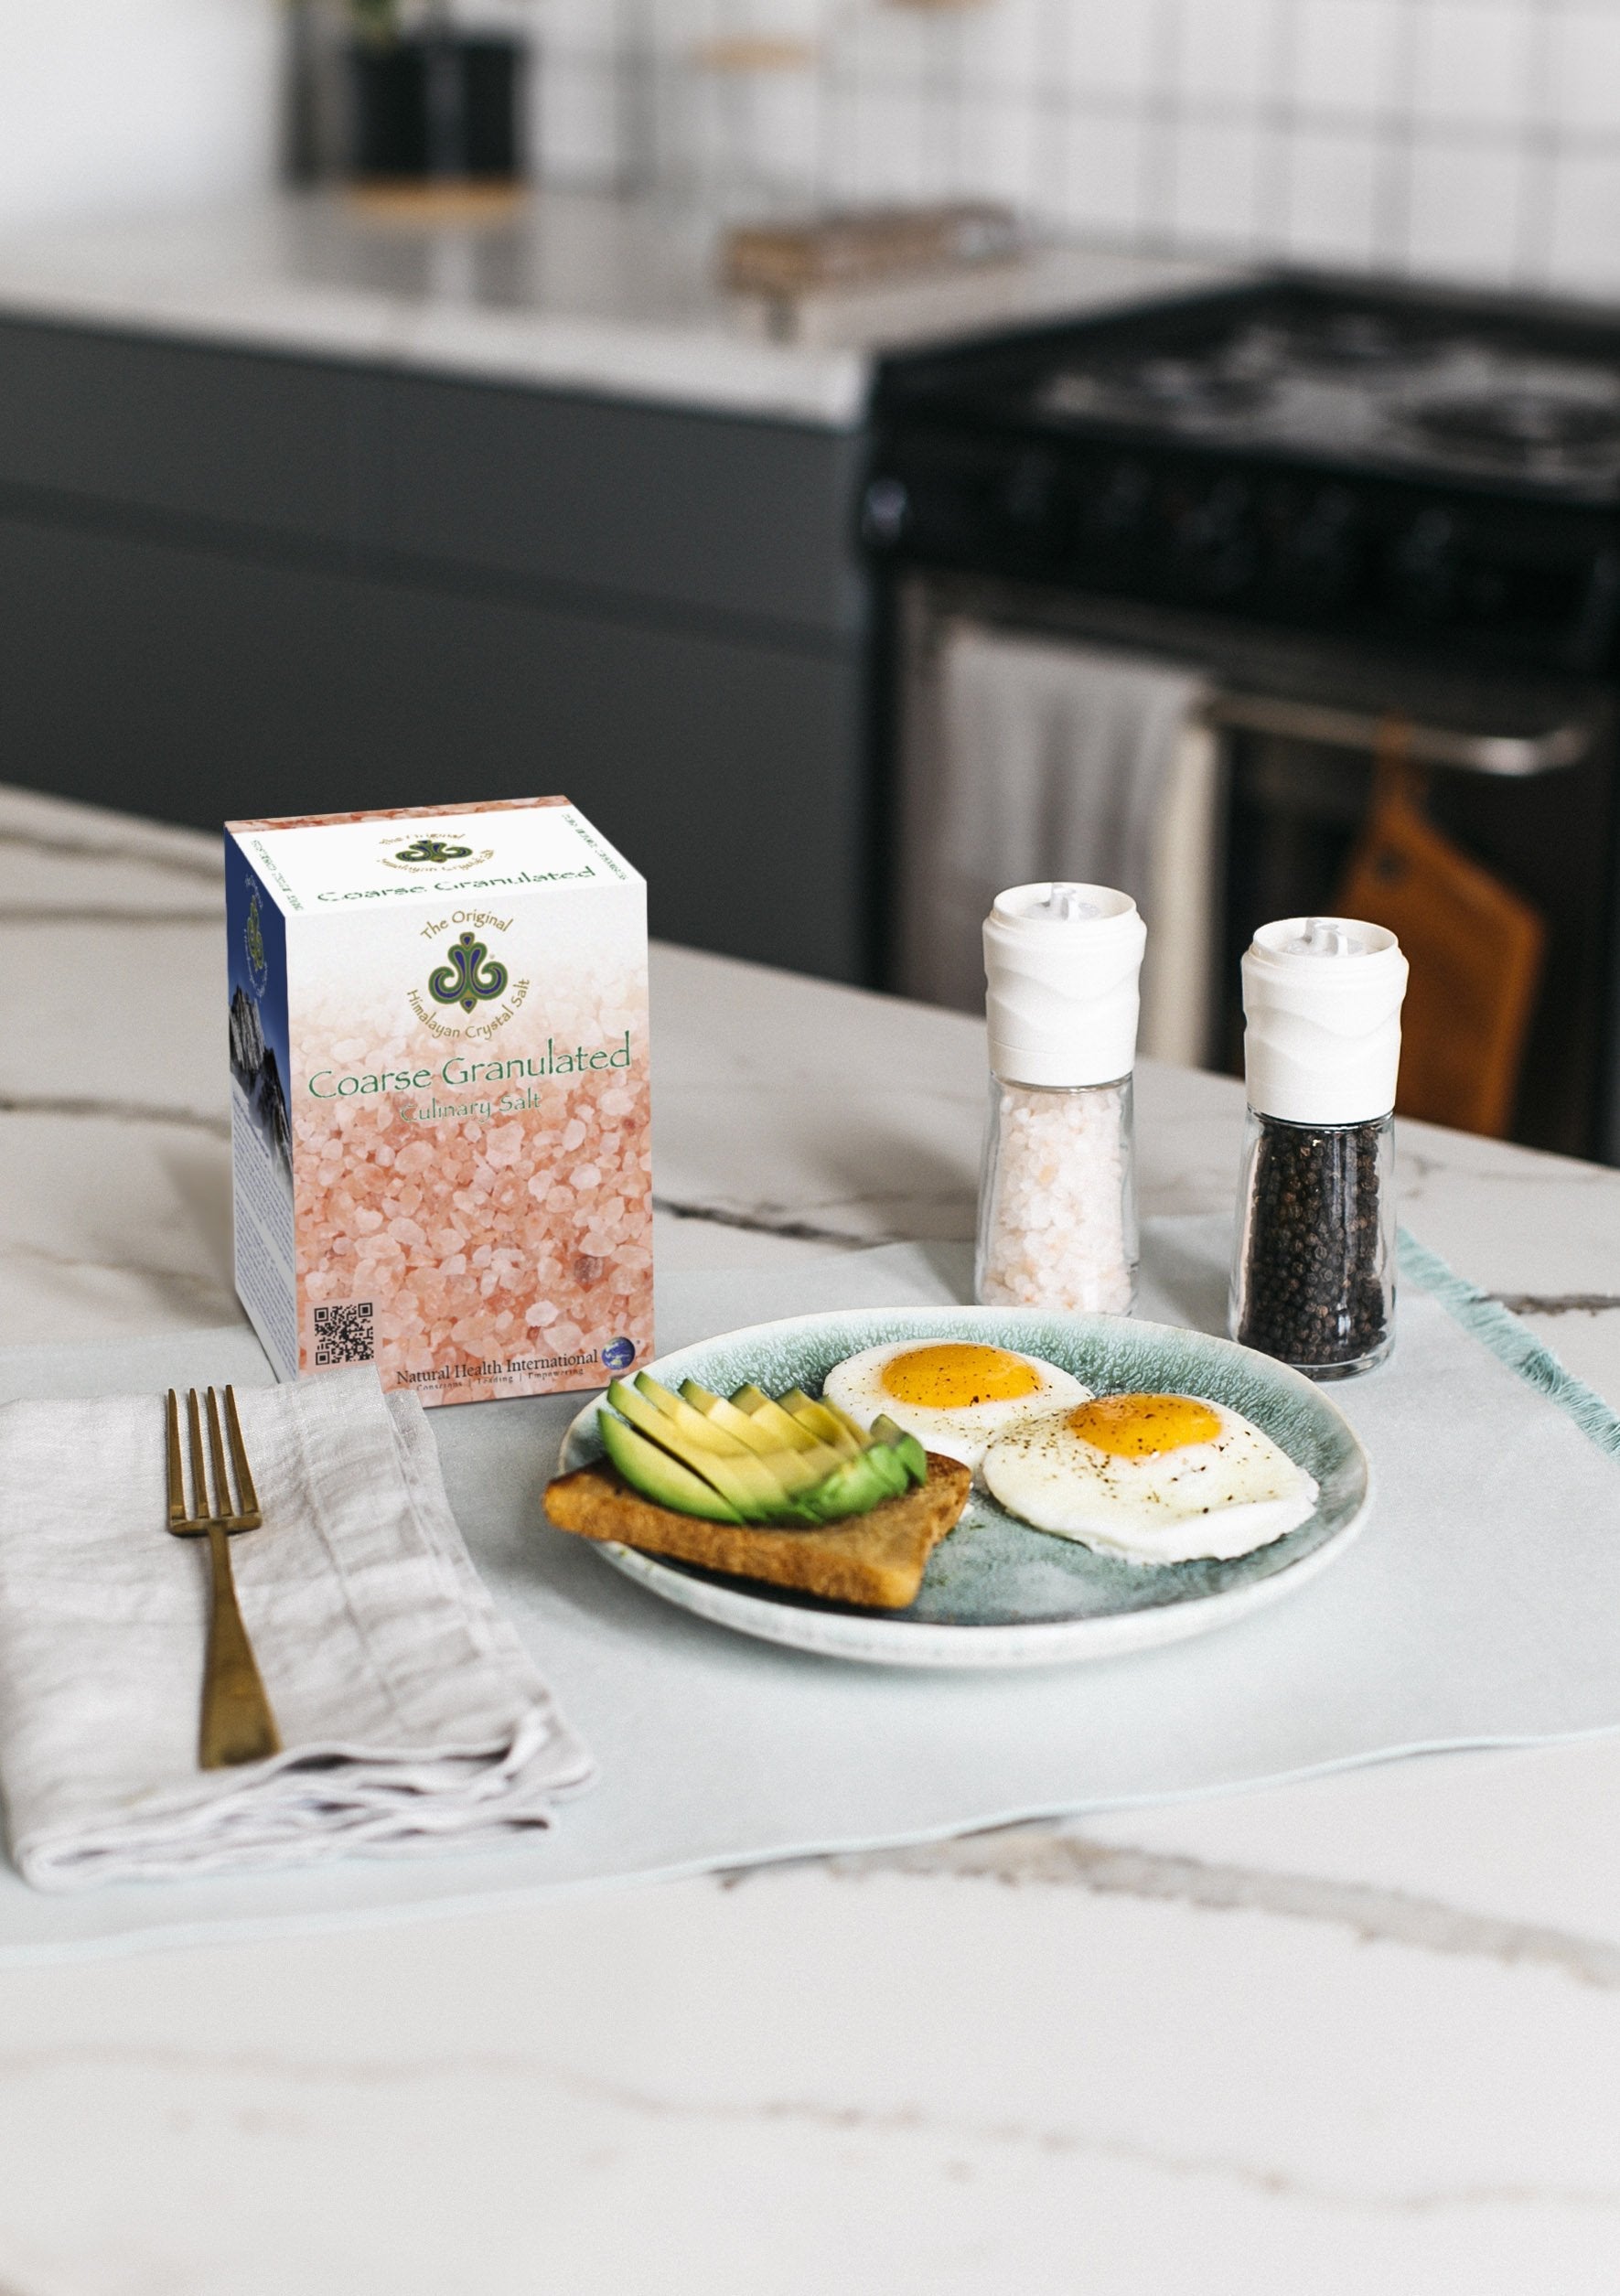 Coarse Salt Bundle (3 Pack) right-facing front of Finely Granulated Culinary Salt product box showing salt granules with salt and spoon, on white and black marble kitchen counter with grinder filled with black pepper and grinder filled with salt, gold fork on white cloth napkin, and plate of avocado toast and sunny-side-up eggs